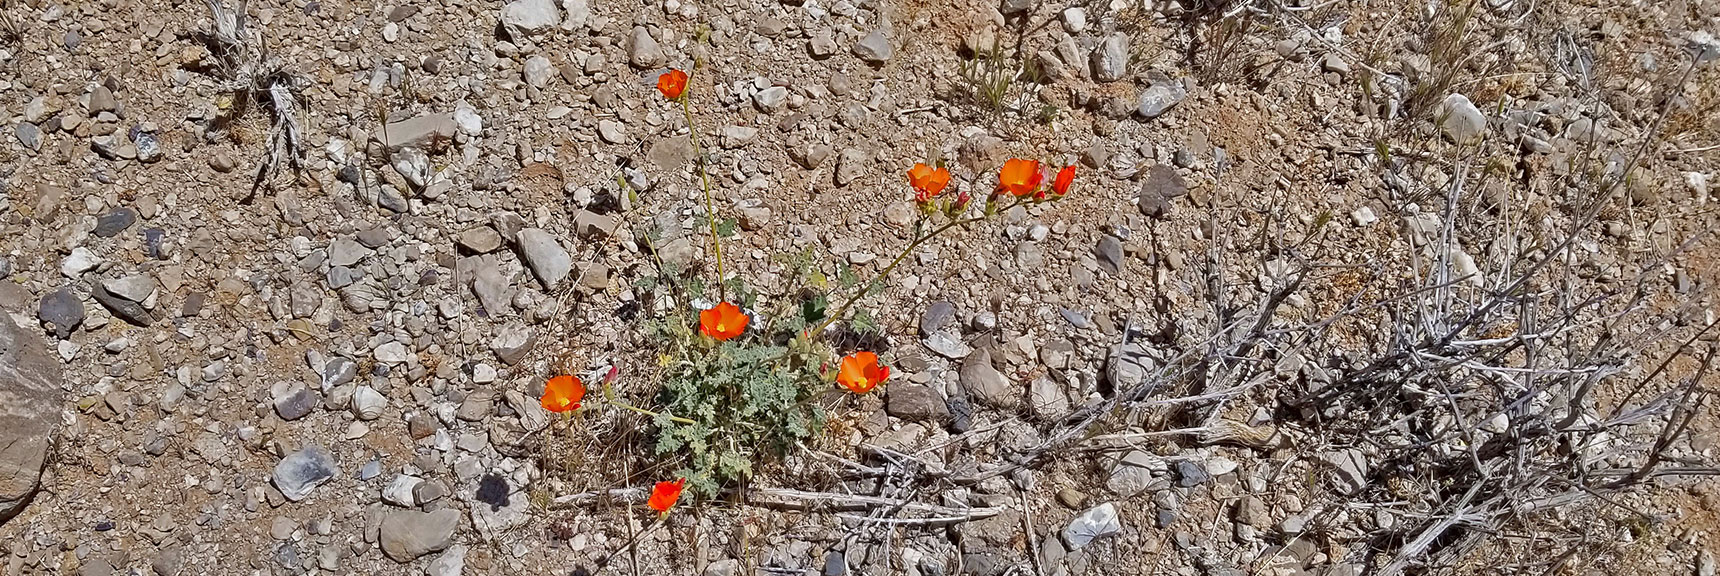 Spring Blooms in the Canyon | Little Red Rock Las Vegas, Nevada, Near La Madre Mountains Wilderness